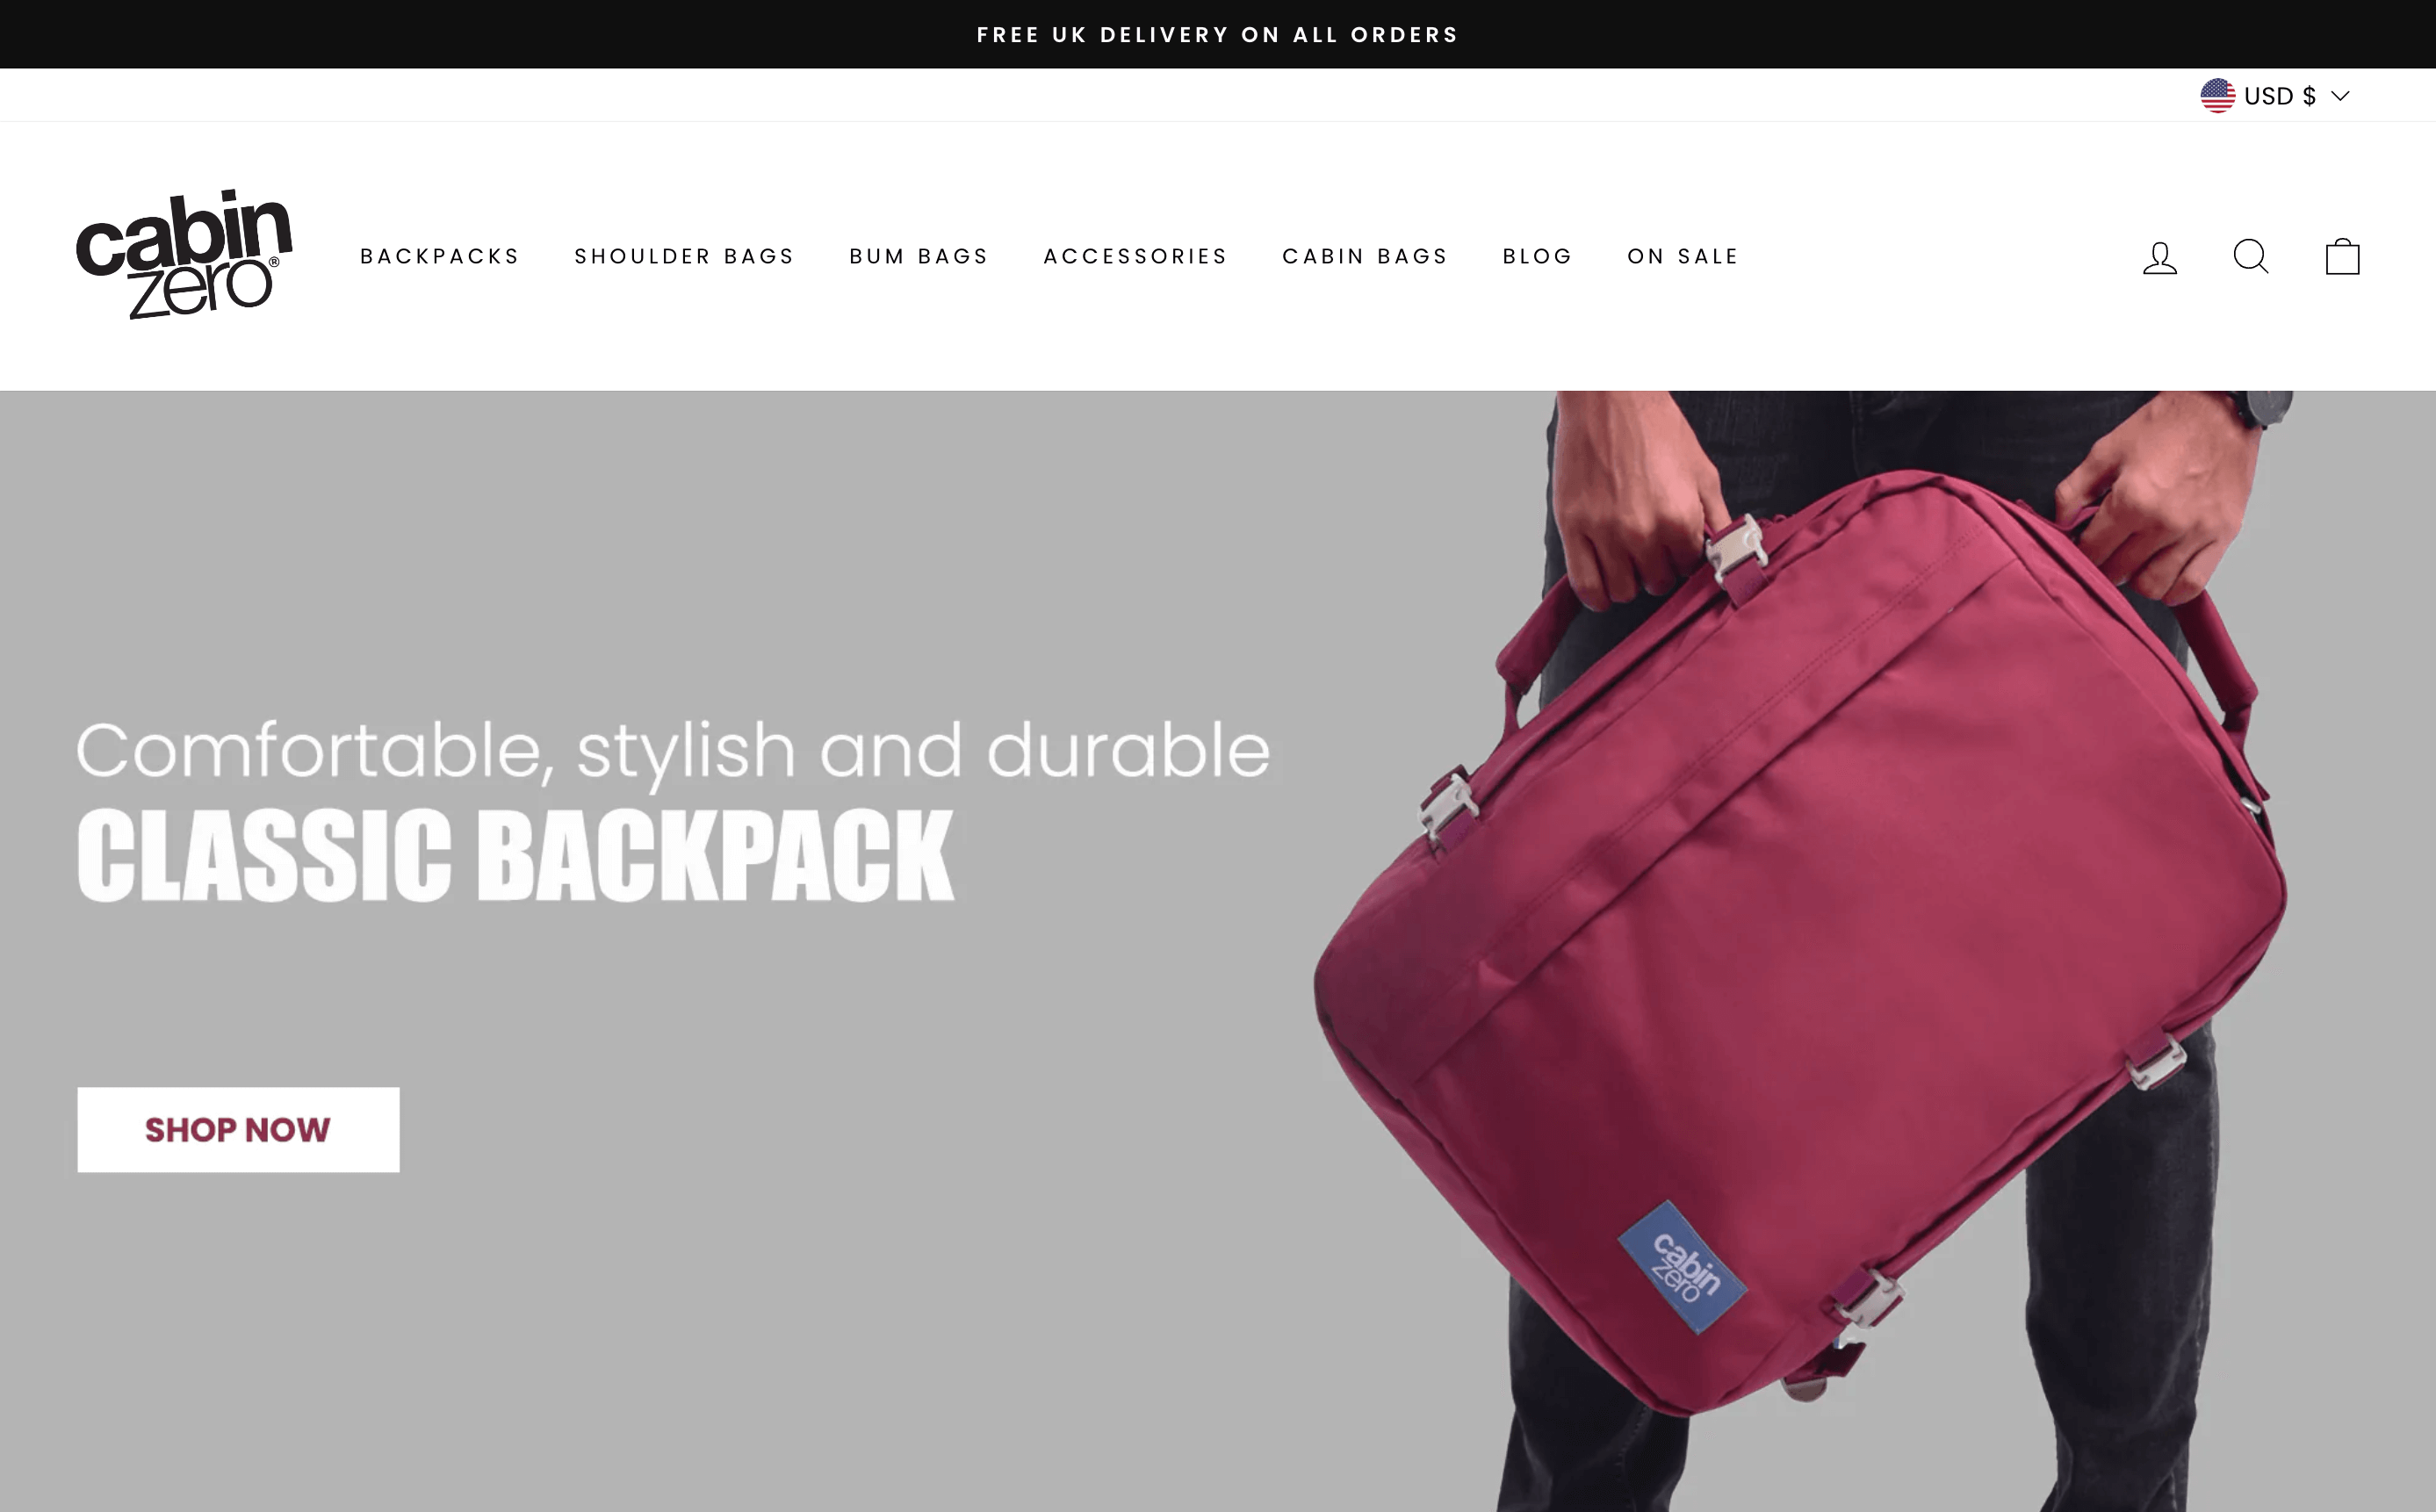 Storytelling Brands–Cabin Zero’s homepage shows a banner image of a man holding one of its red travel backpacks. There is a CTA to shop their Classic Backpack range of products. 